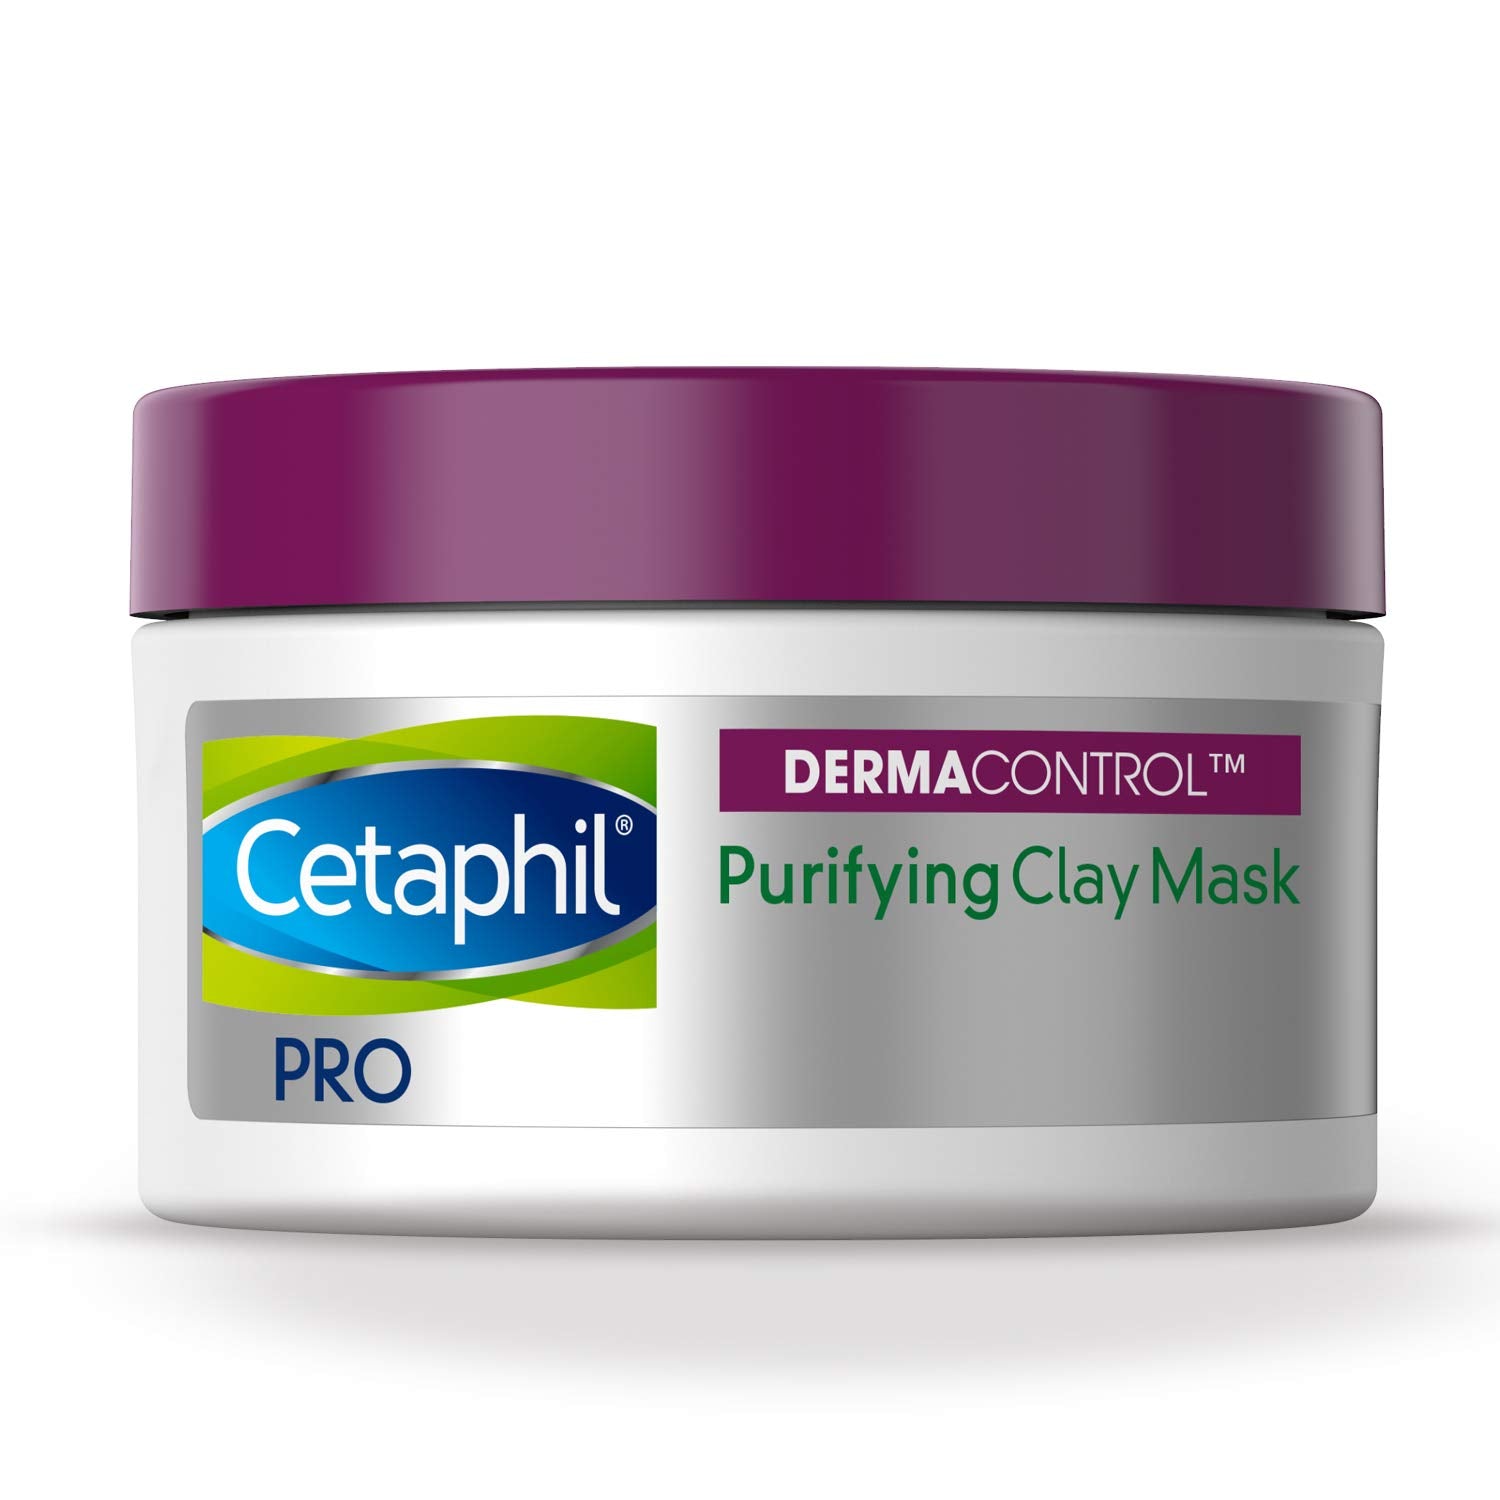 Pro Dermacontrol Purifying Clay Mask With bentonite Clay for Oily, Sensitive Skin, 3 Oz